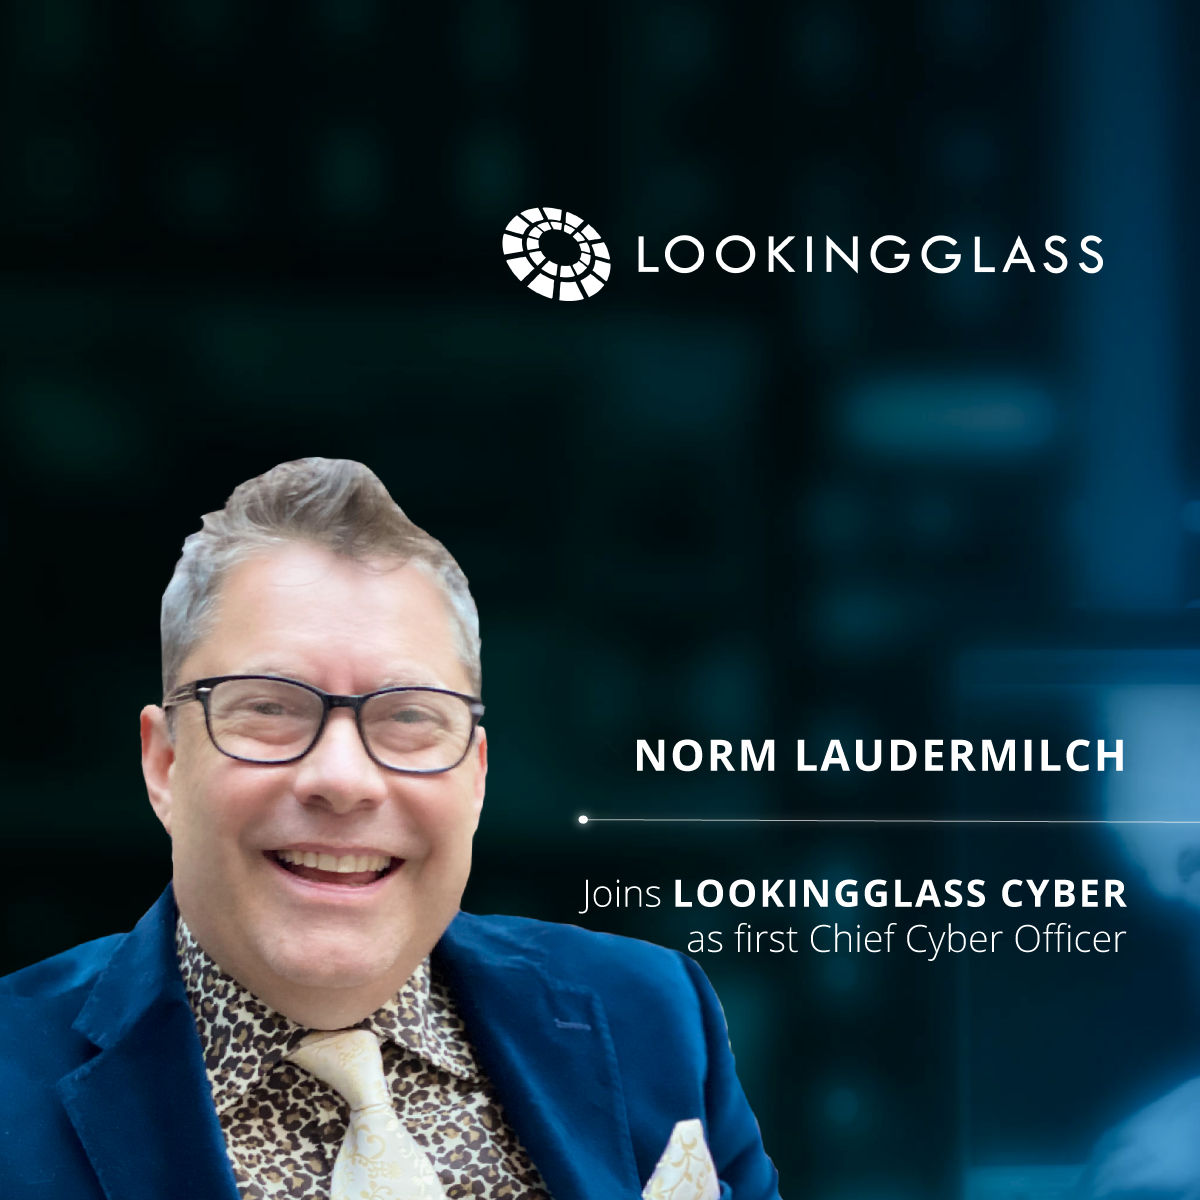 LookingGlass Hires Norm Laudermilch as First Chief Cyber Officer